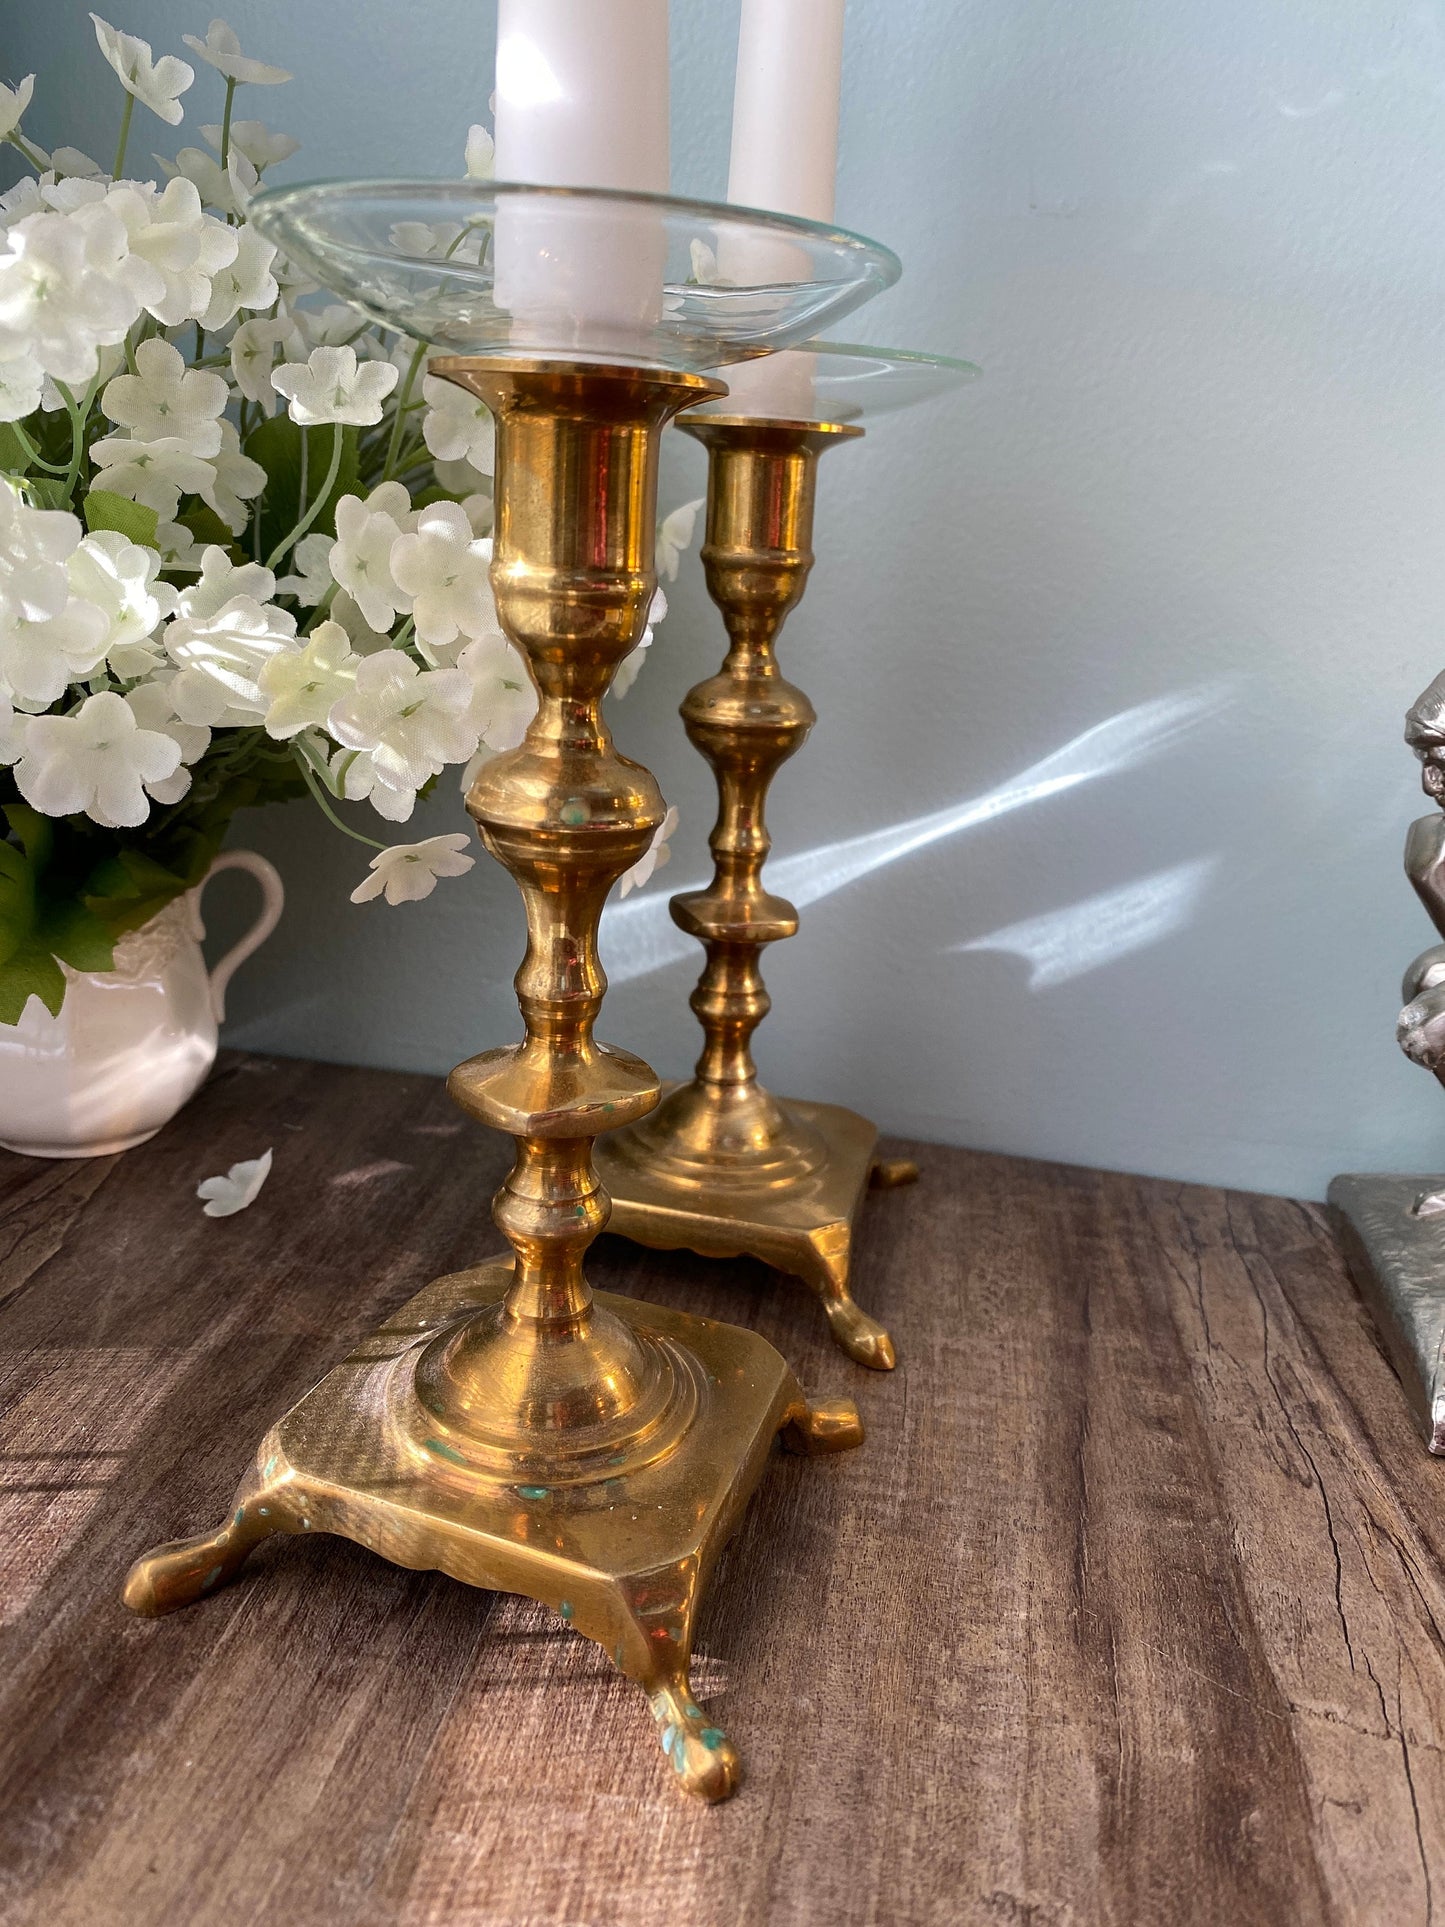 ♥ How to make Classic Candlesticks with Bobeches and